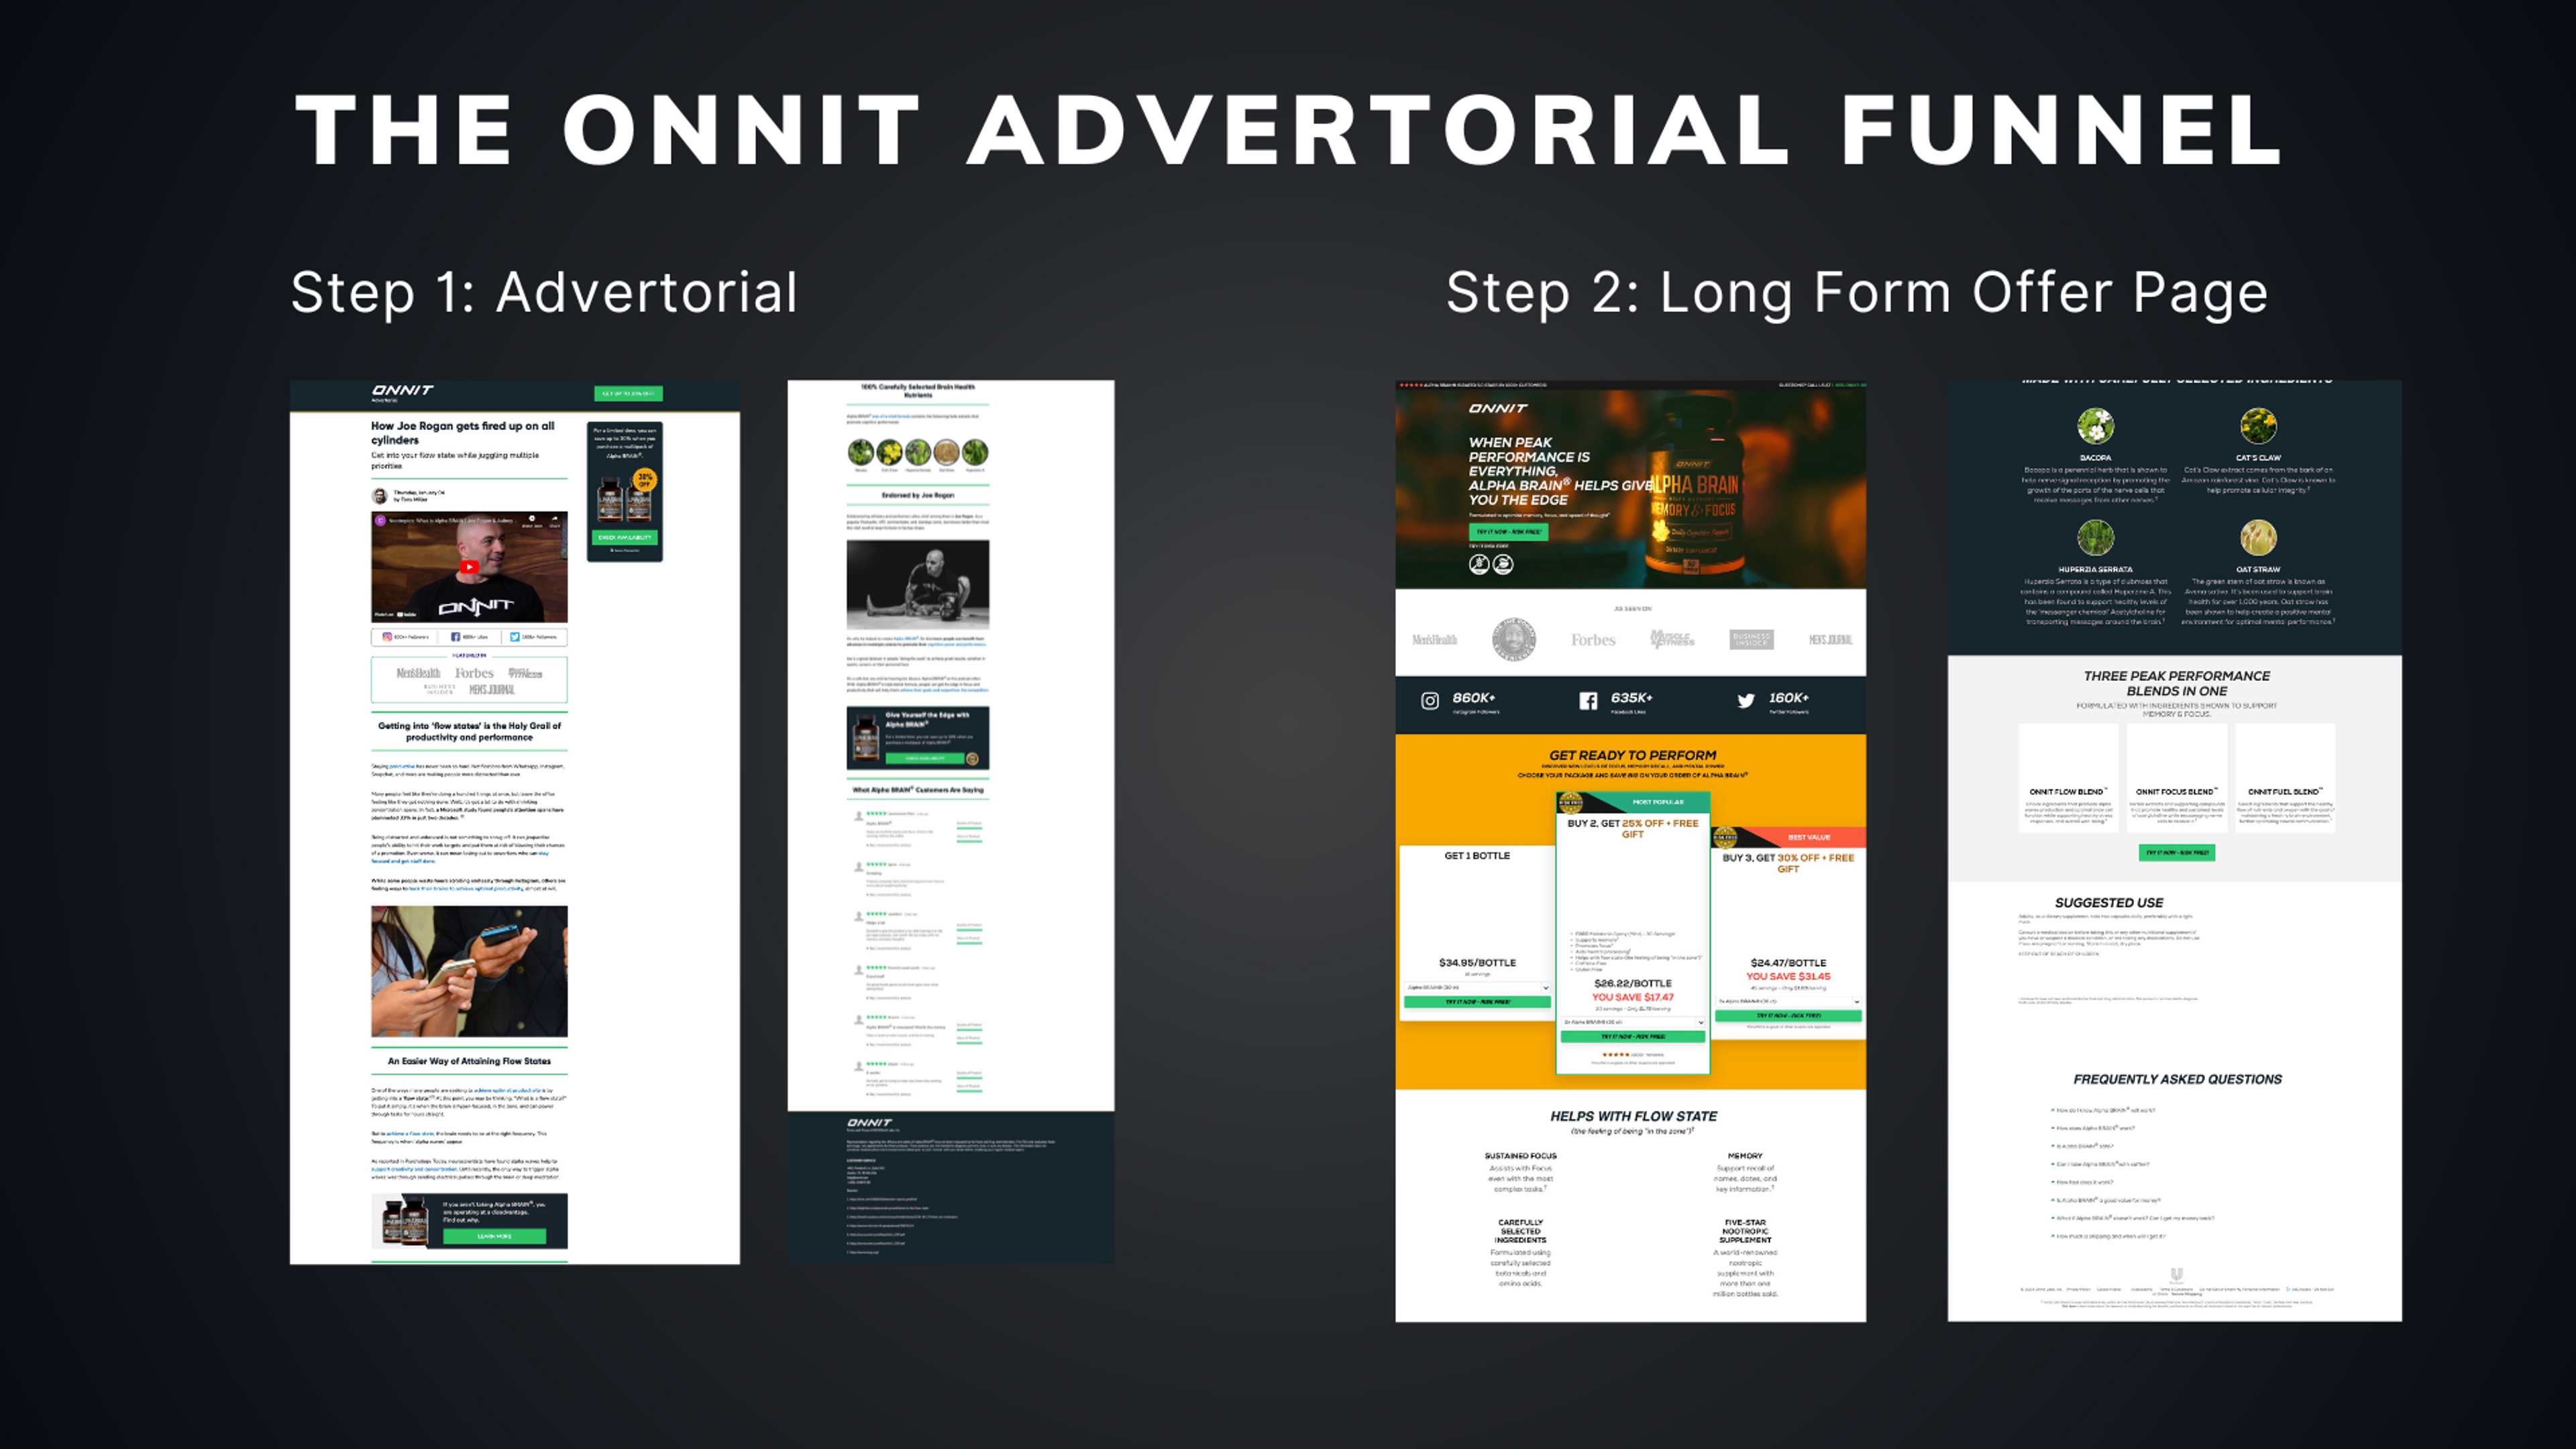 The Onnit Advertorial Funnel Full Experience